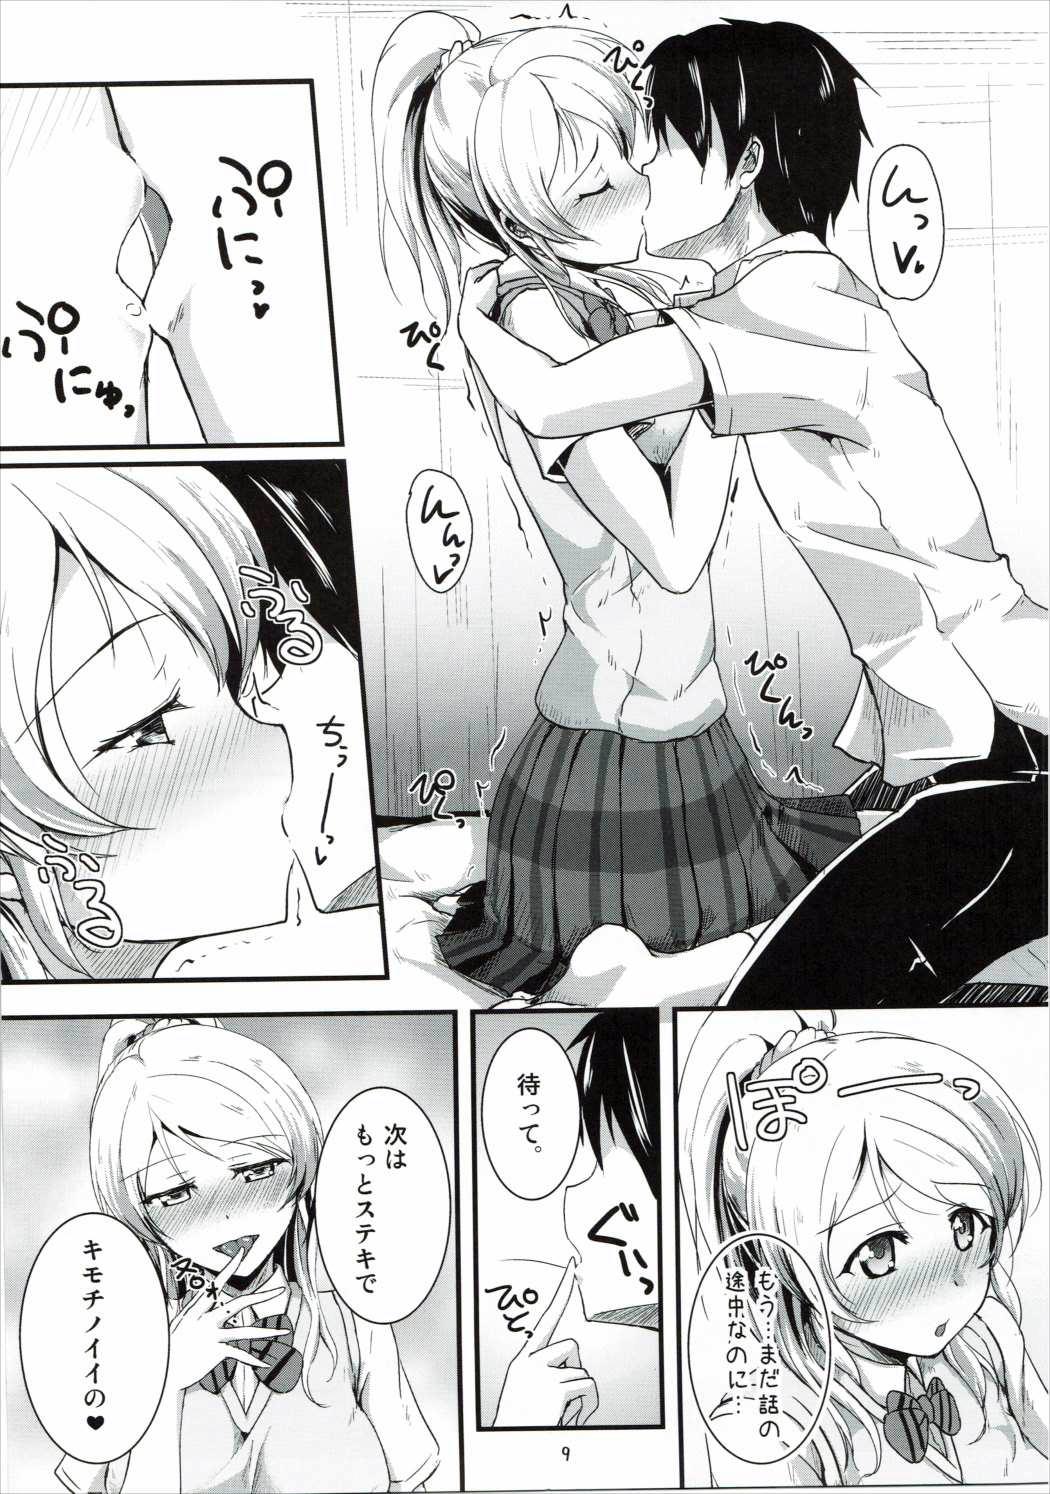 Wives Let's Study xxx - Love live Two - Page 8